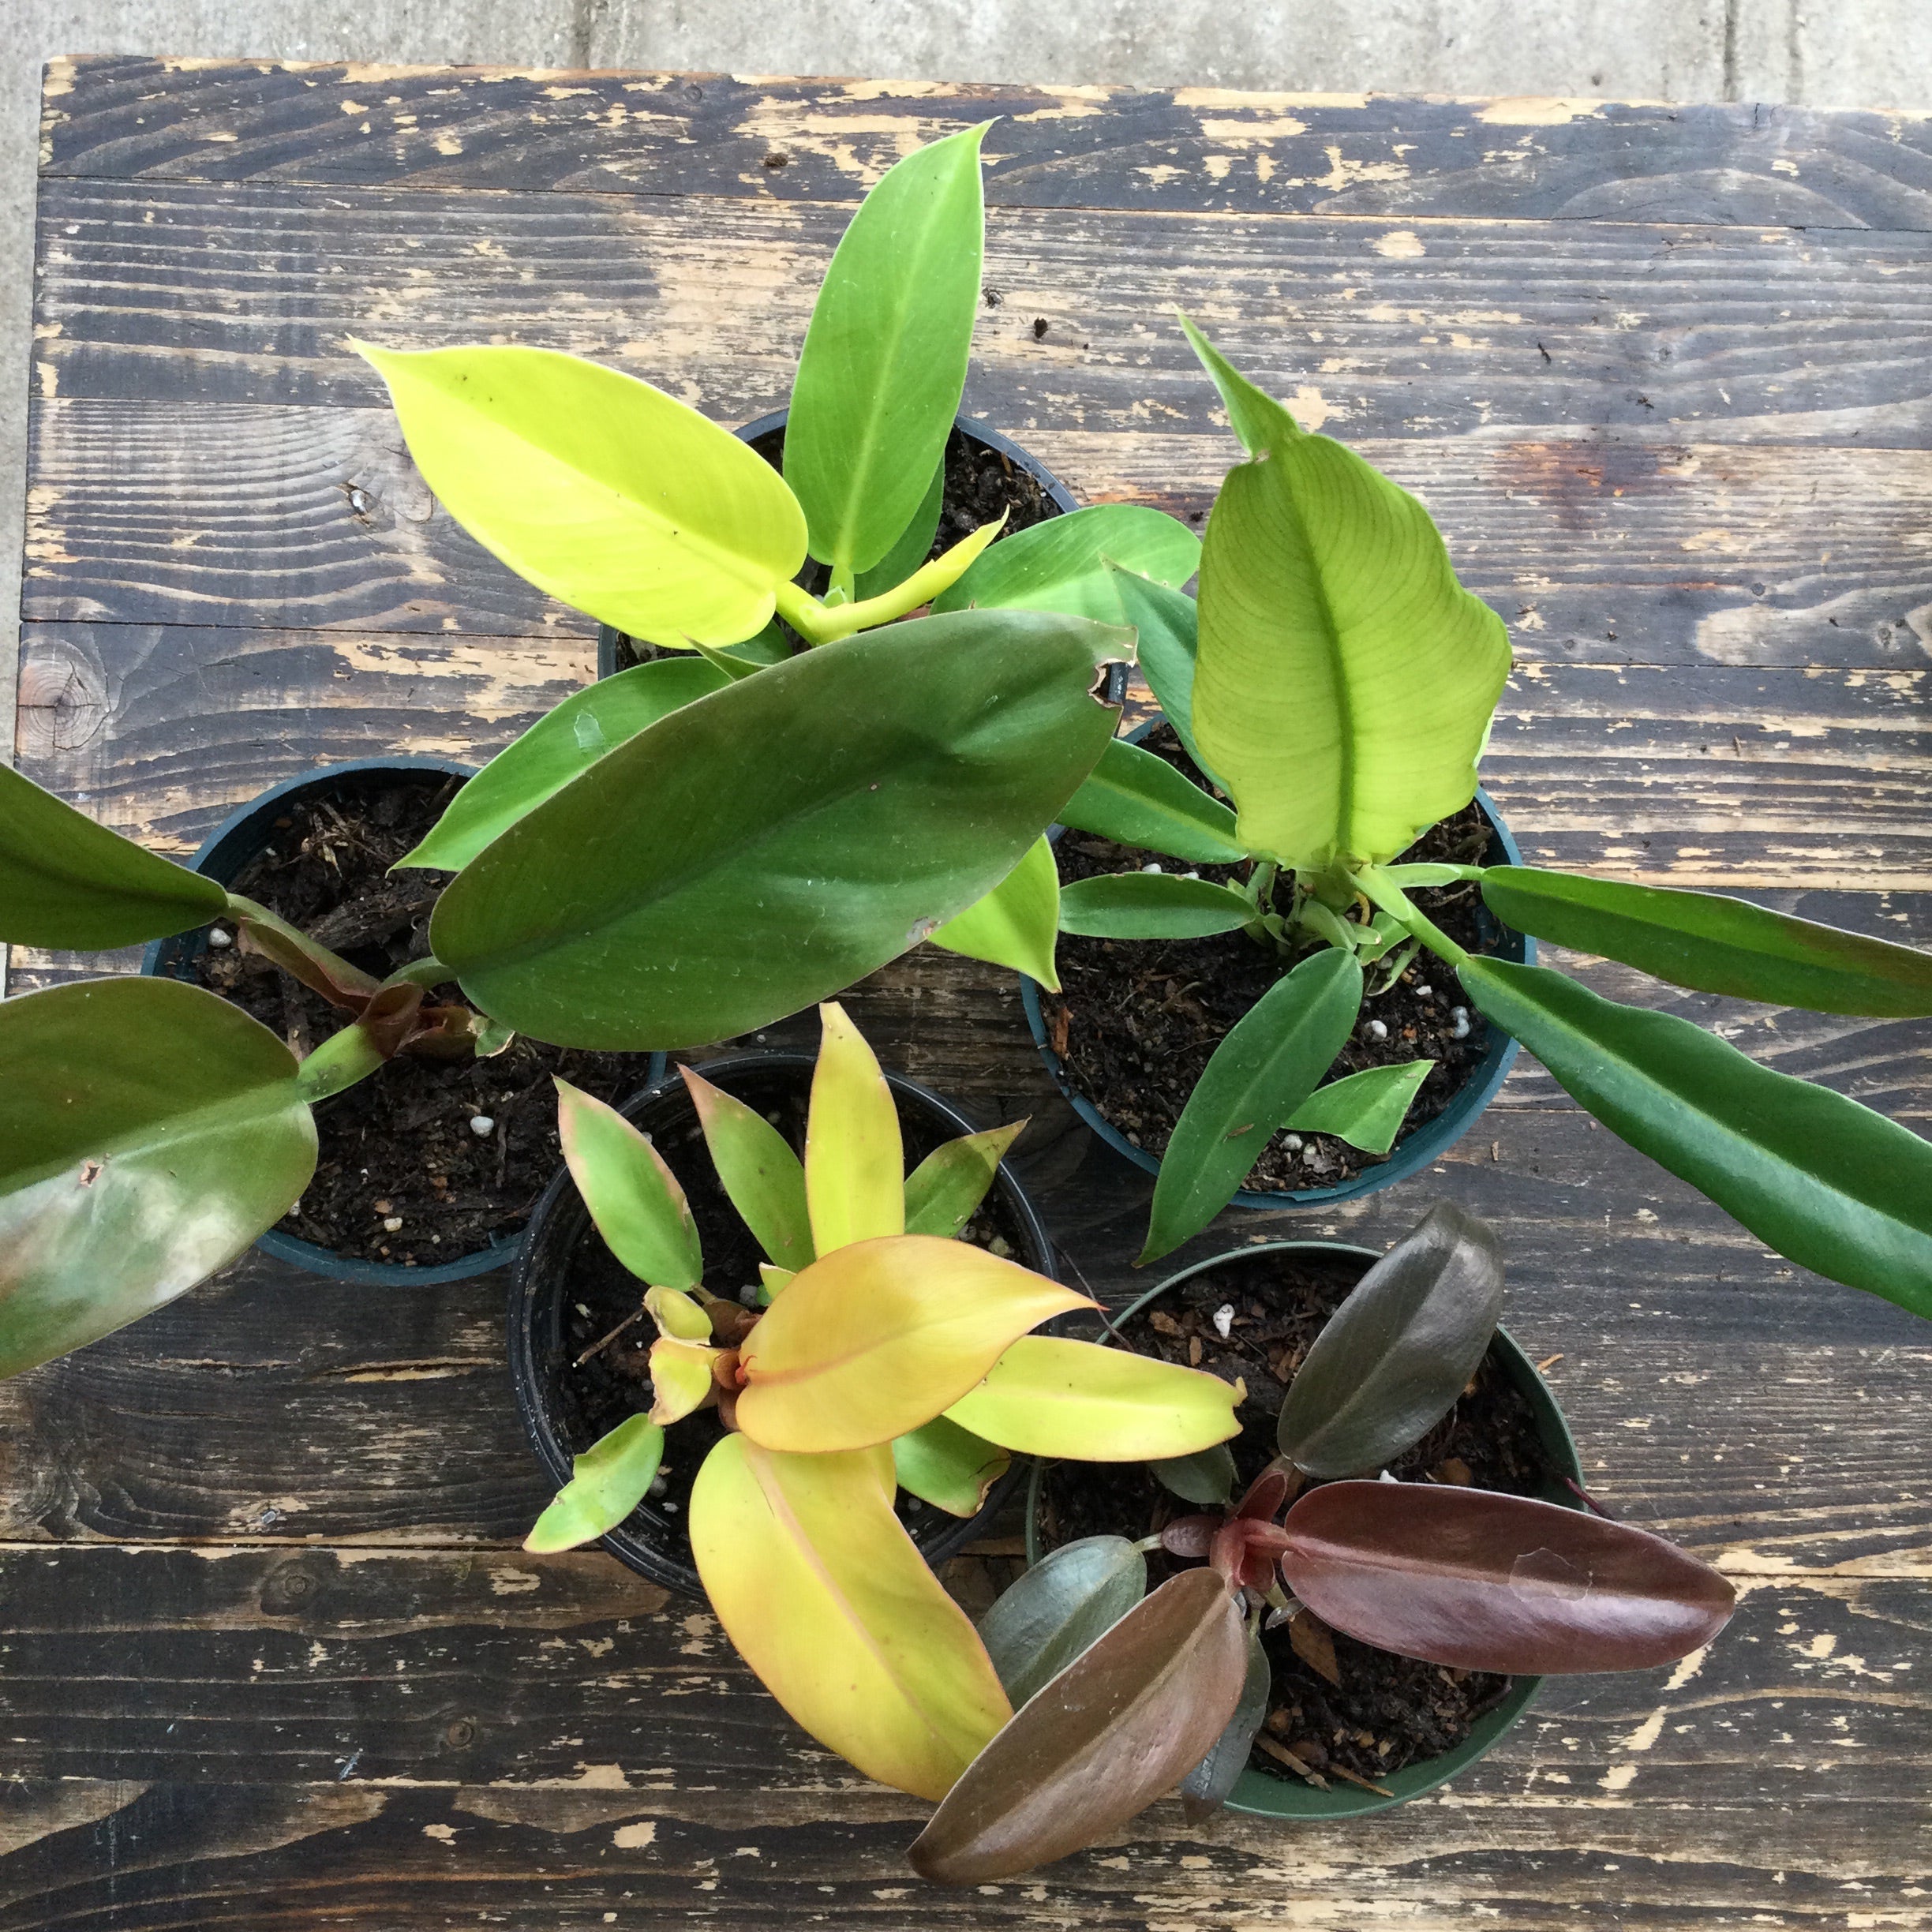 Philodendron Mix